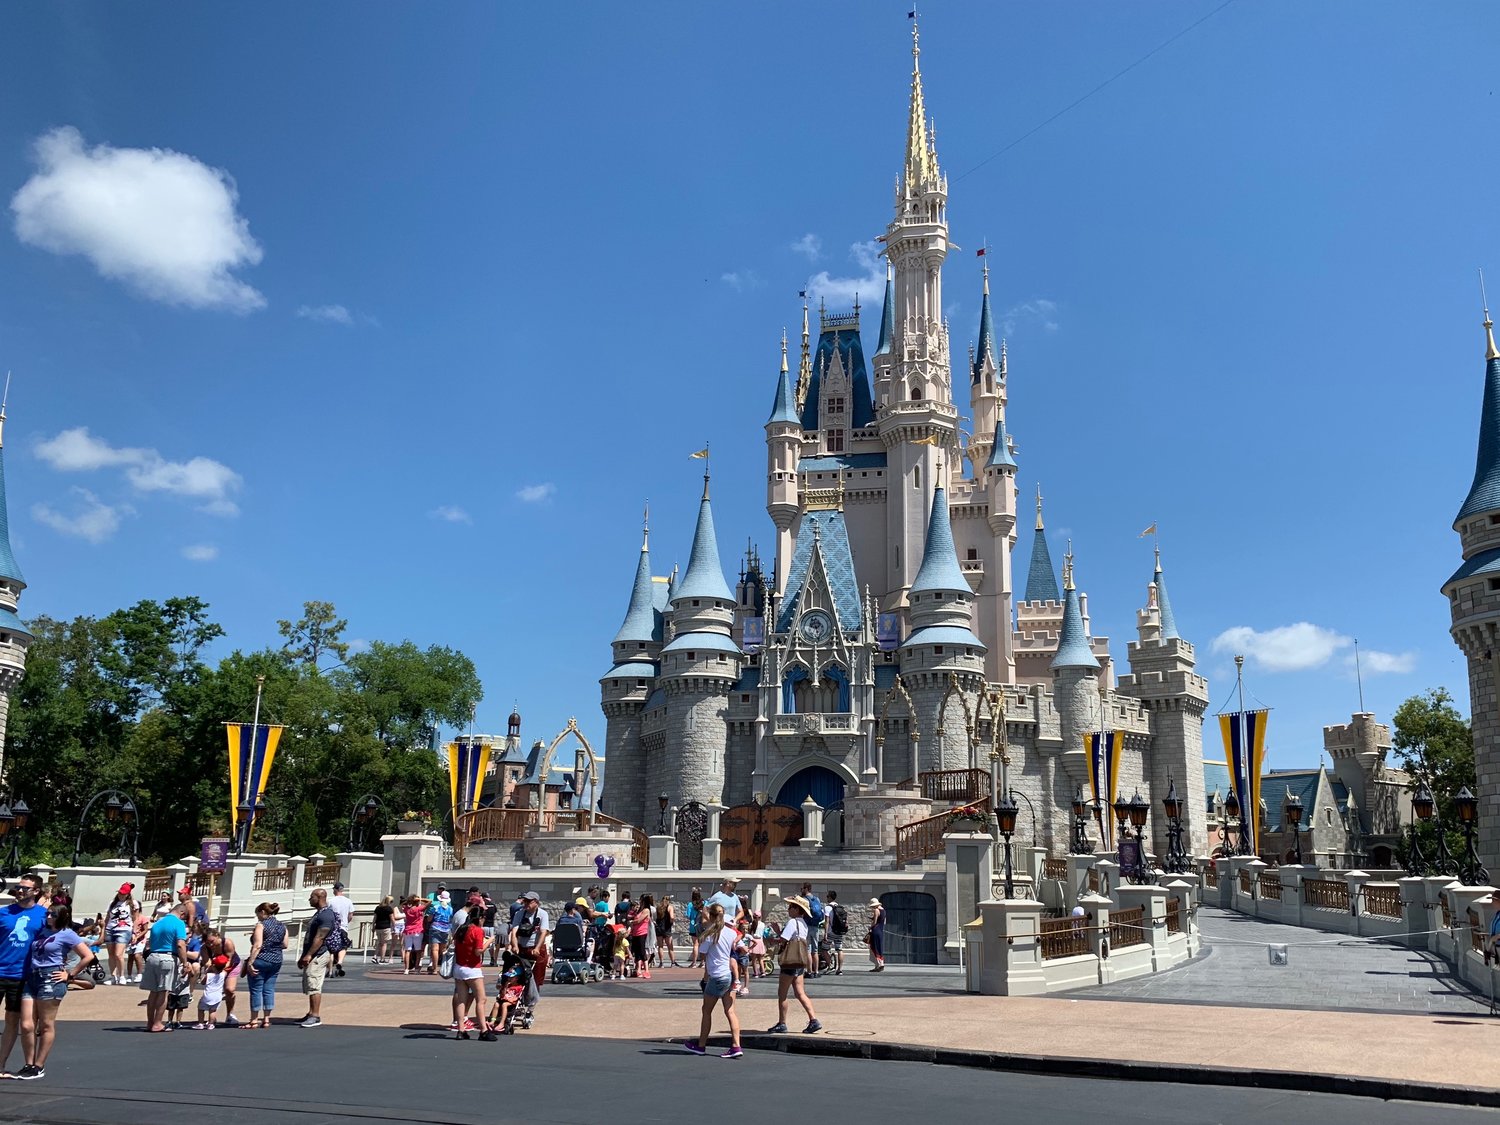 https://www.mousehacking.com/blog/disney-world-early-summer-2019-trip-report-part-5